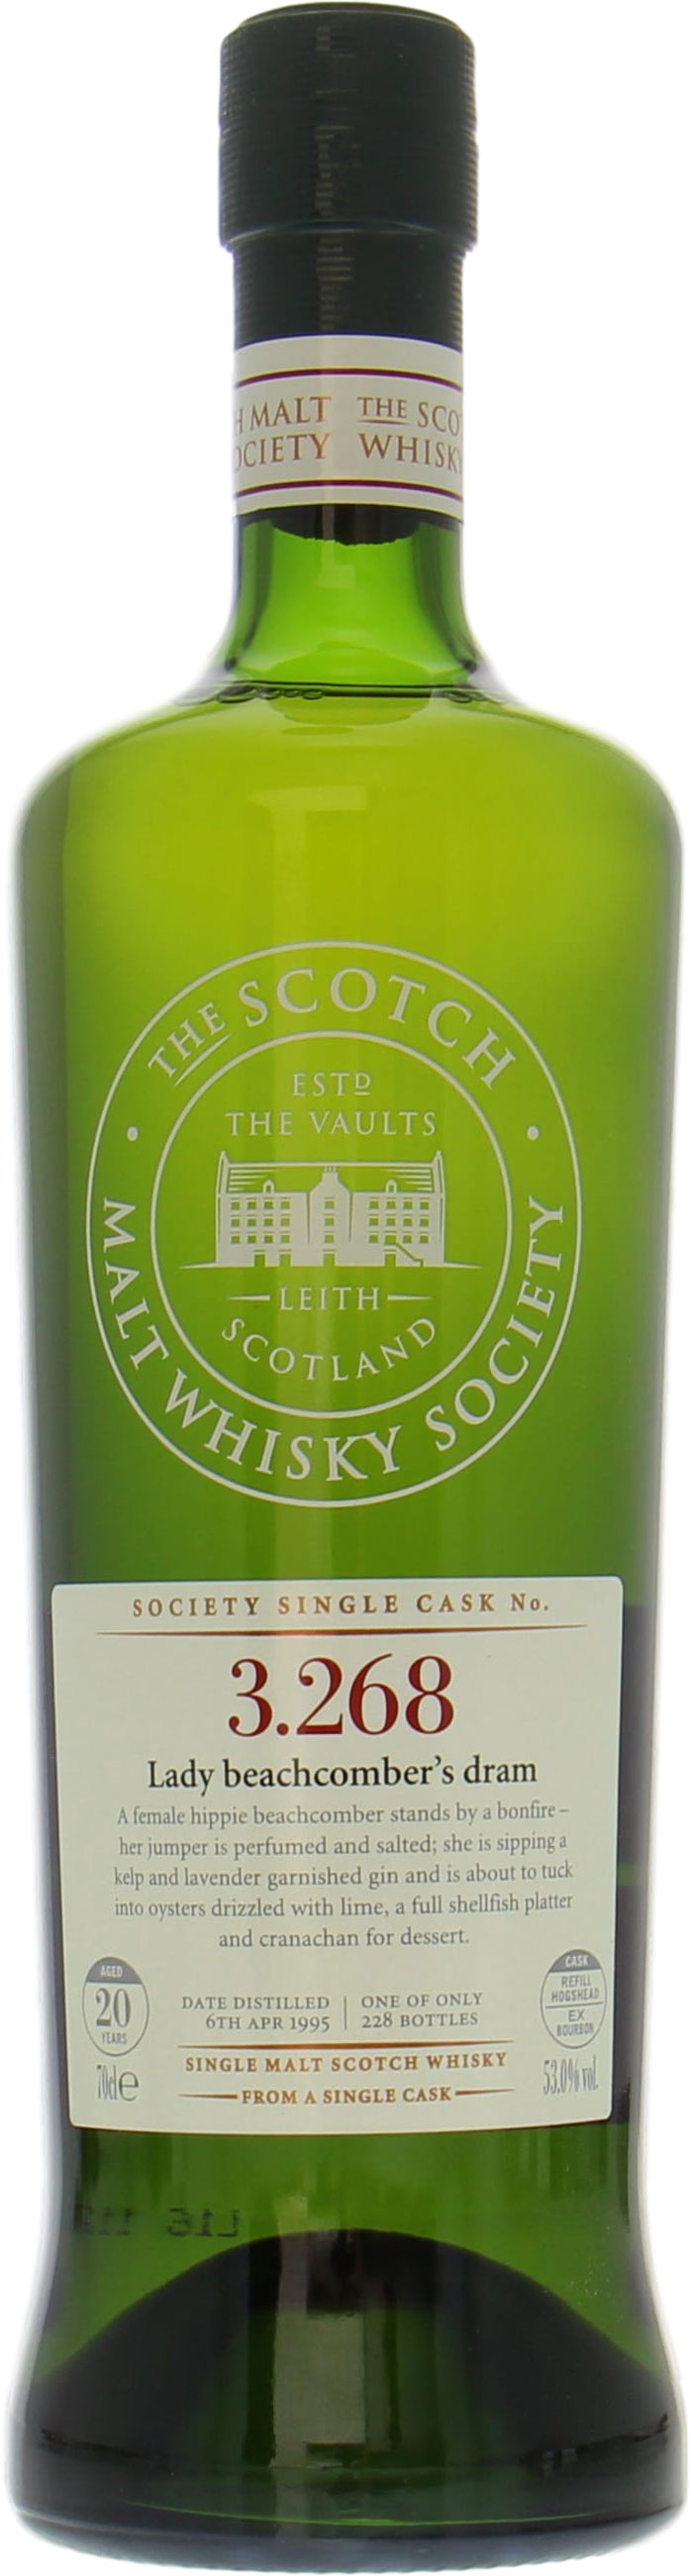 Bowmore - 20 Years Old SMWS 3.268 Lady beachcomber's dram 53% 1995